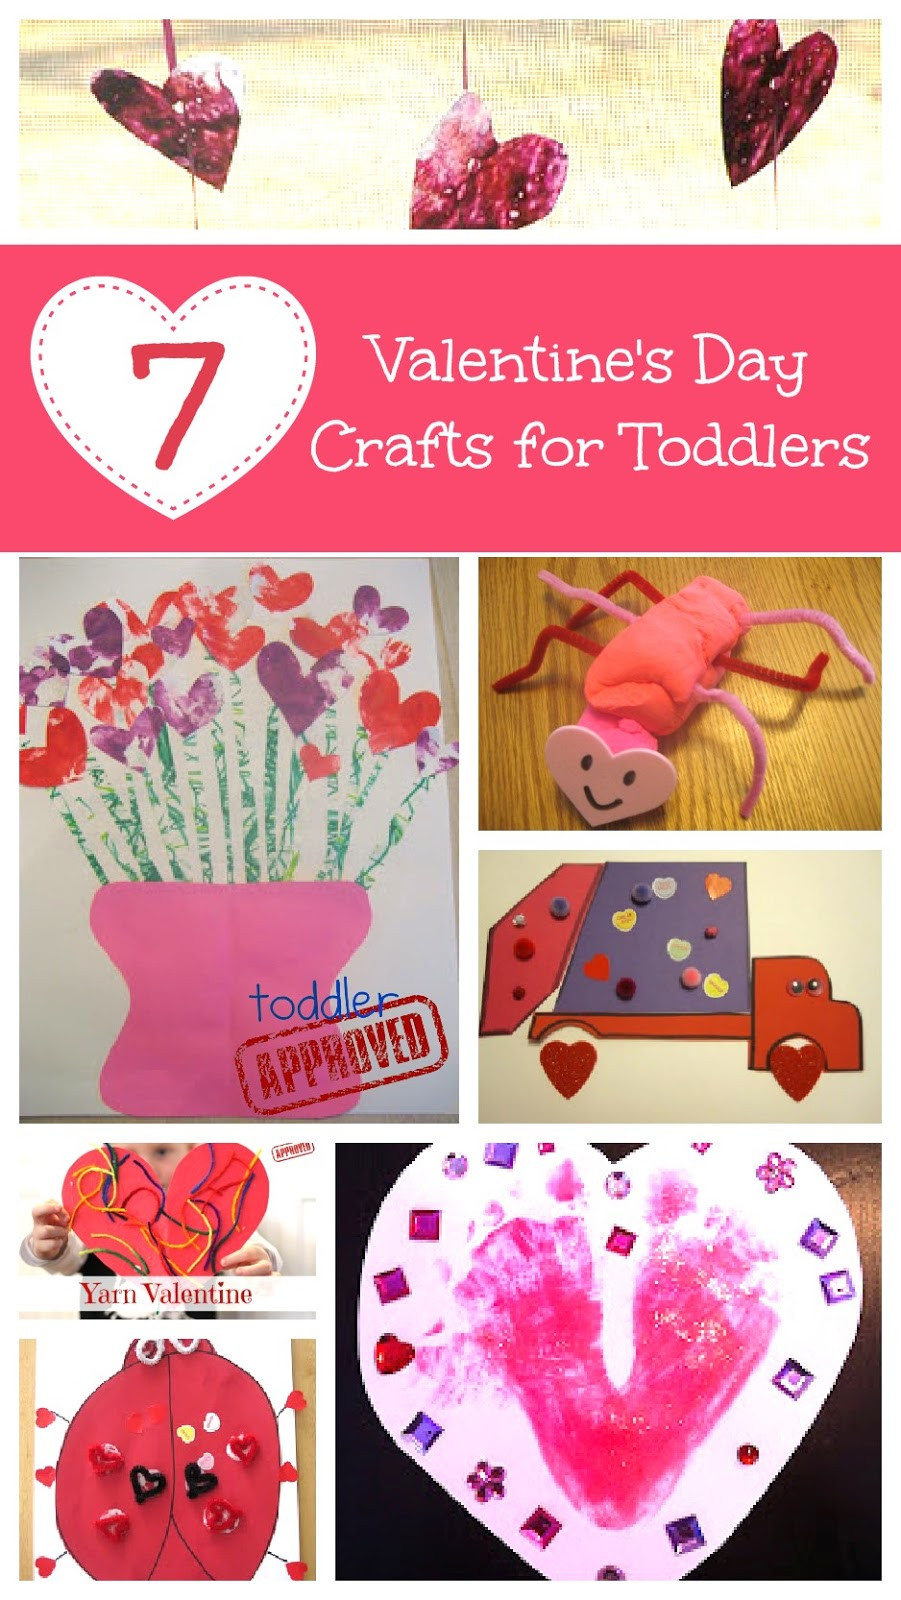 Valentines Day Activities For Toddlers
 Toddler Approved 7 Valentine s Day Crafts for Toddlers